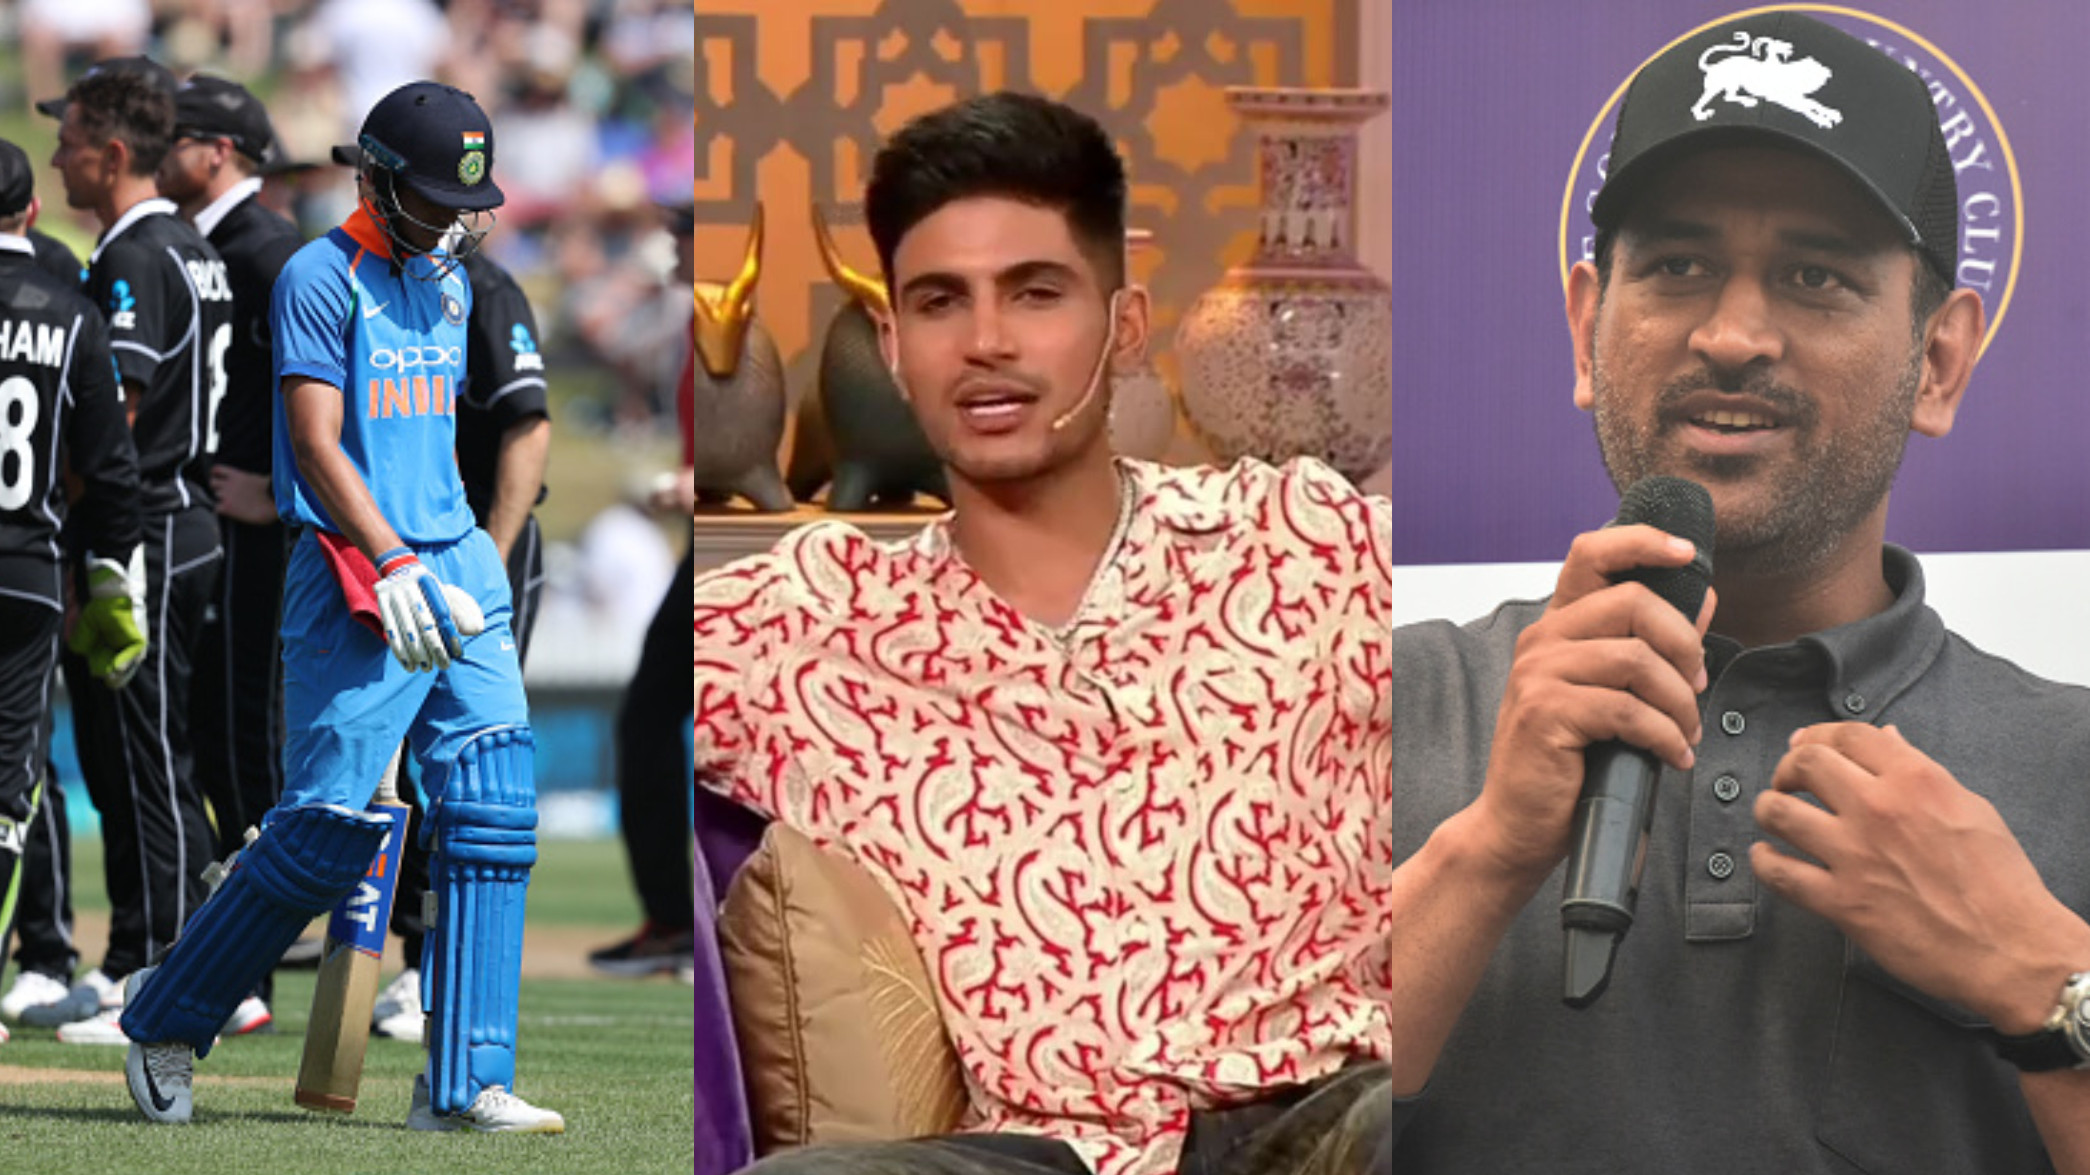 WATCH- ‘At least your debut was better than mine'- Shubman Gill recalls MS Dhoni consoling him after poor ODI debut